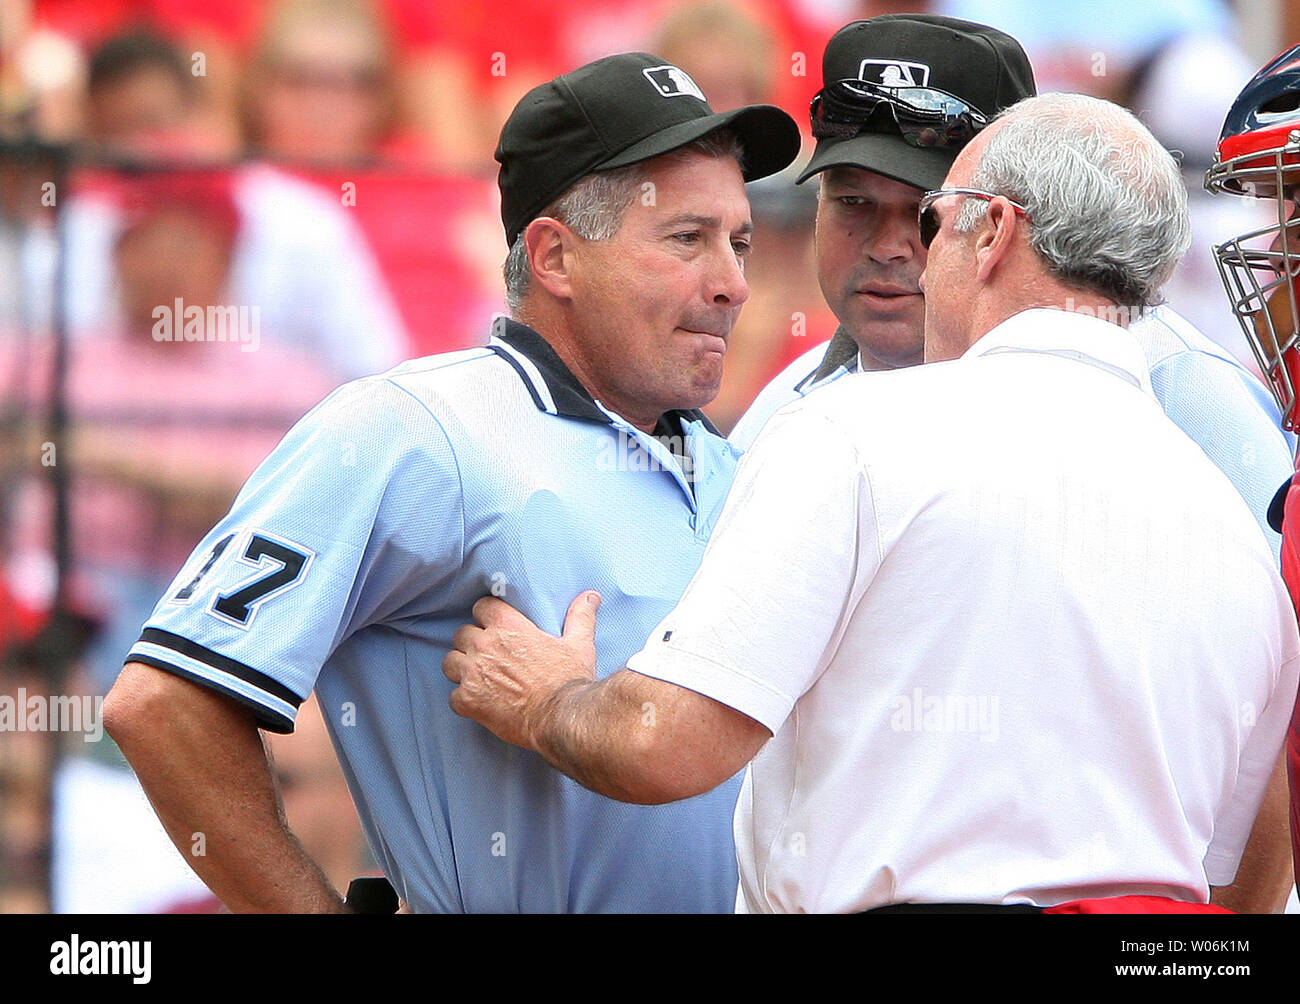 St. Louis Cardinals head trainer Barry Weinberg (R) checks the status of home plate umpire John Hirschbeck after taking a foul tip to the face off Arizona Diamondbacks Justin Upton in the first inning at Busch Stadium in St. Louis on July 19, 2009. Looking on is crew chief Wally Bell. Hirshbeck left the game with a mild concussion.    (UPI Photo/Bill Greenblatt) Stock Photo